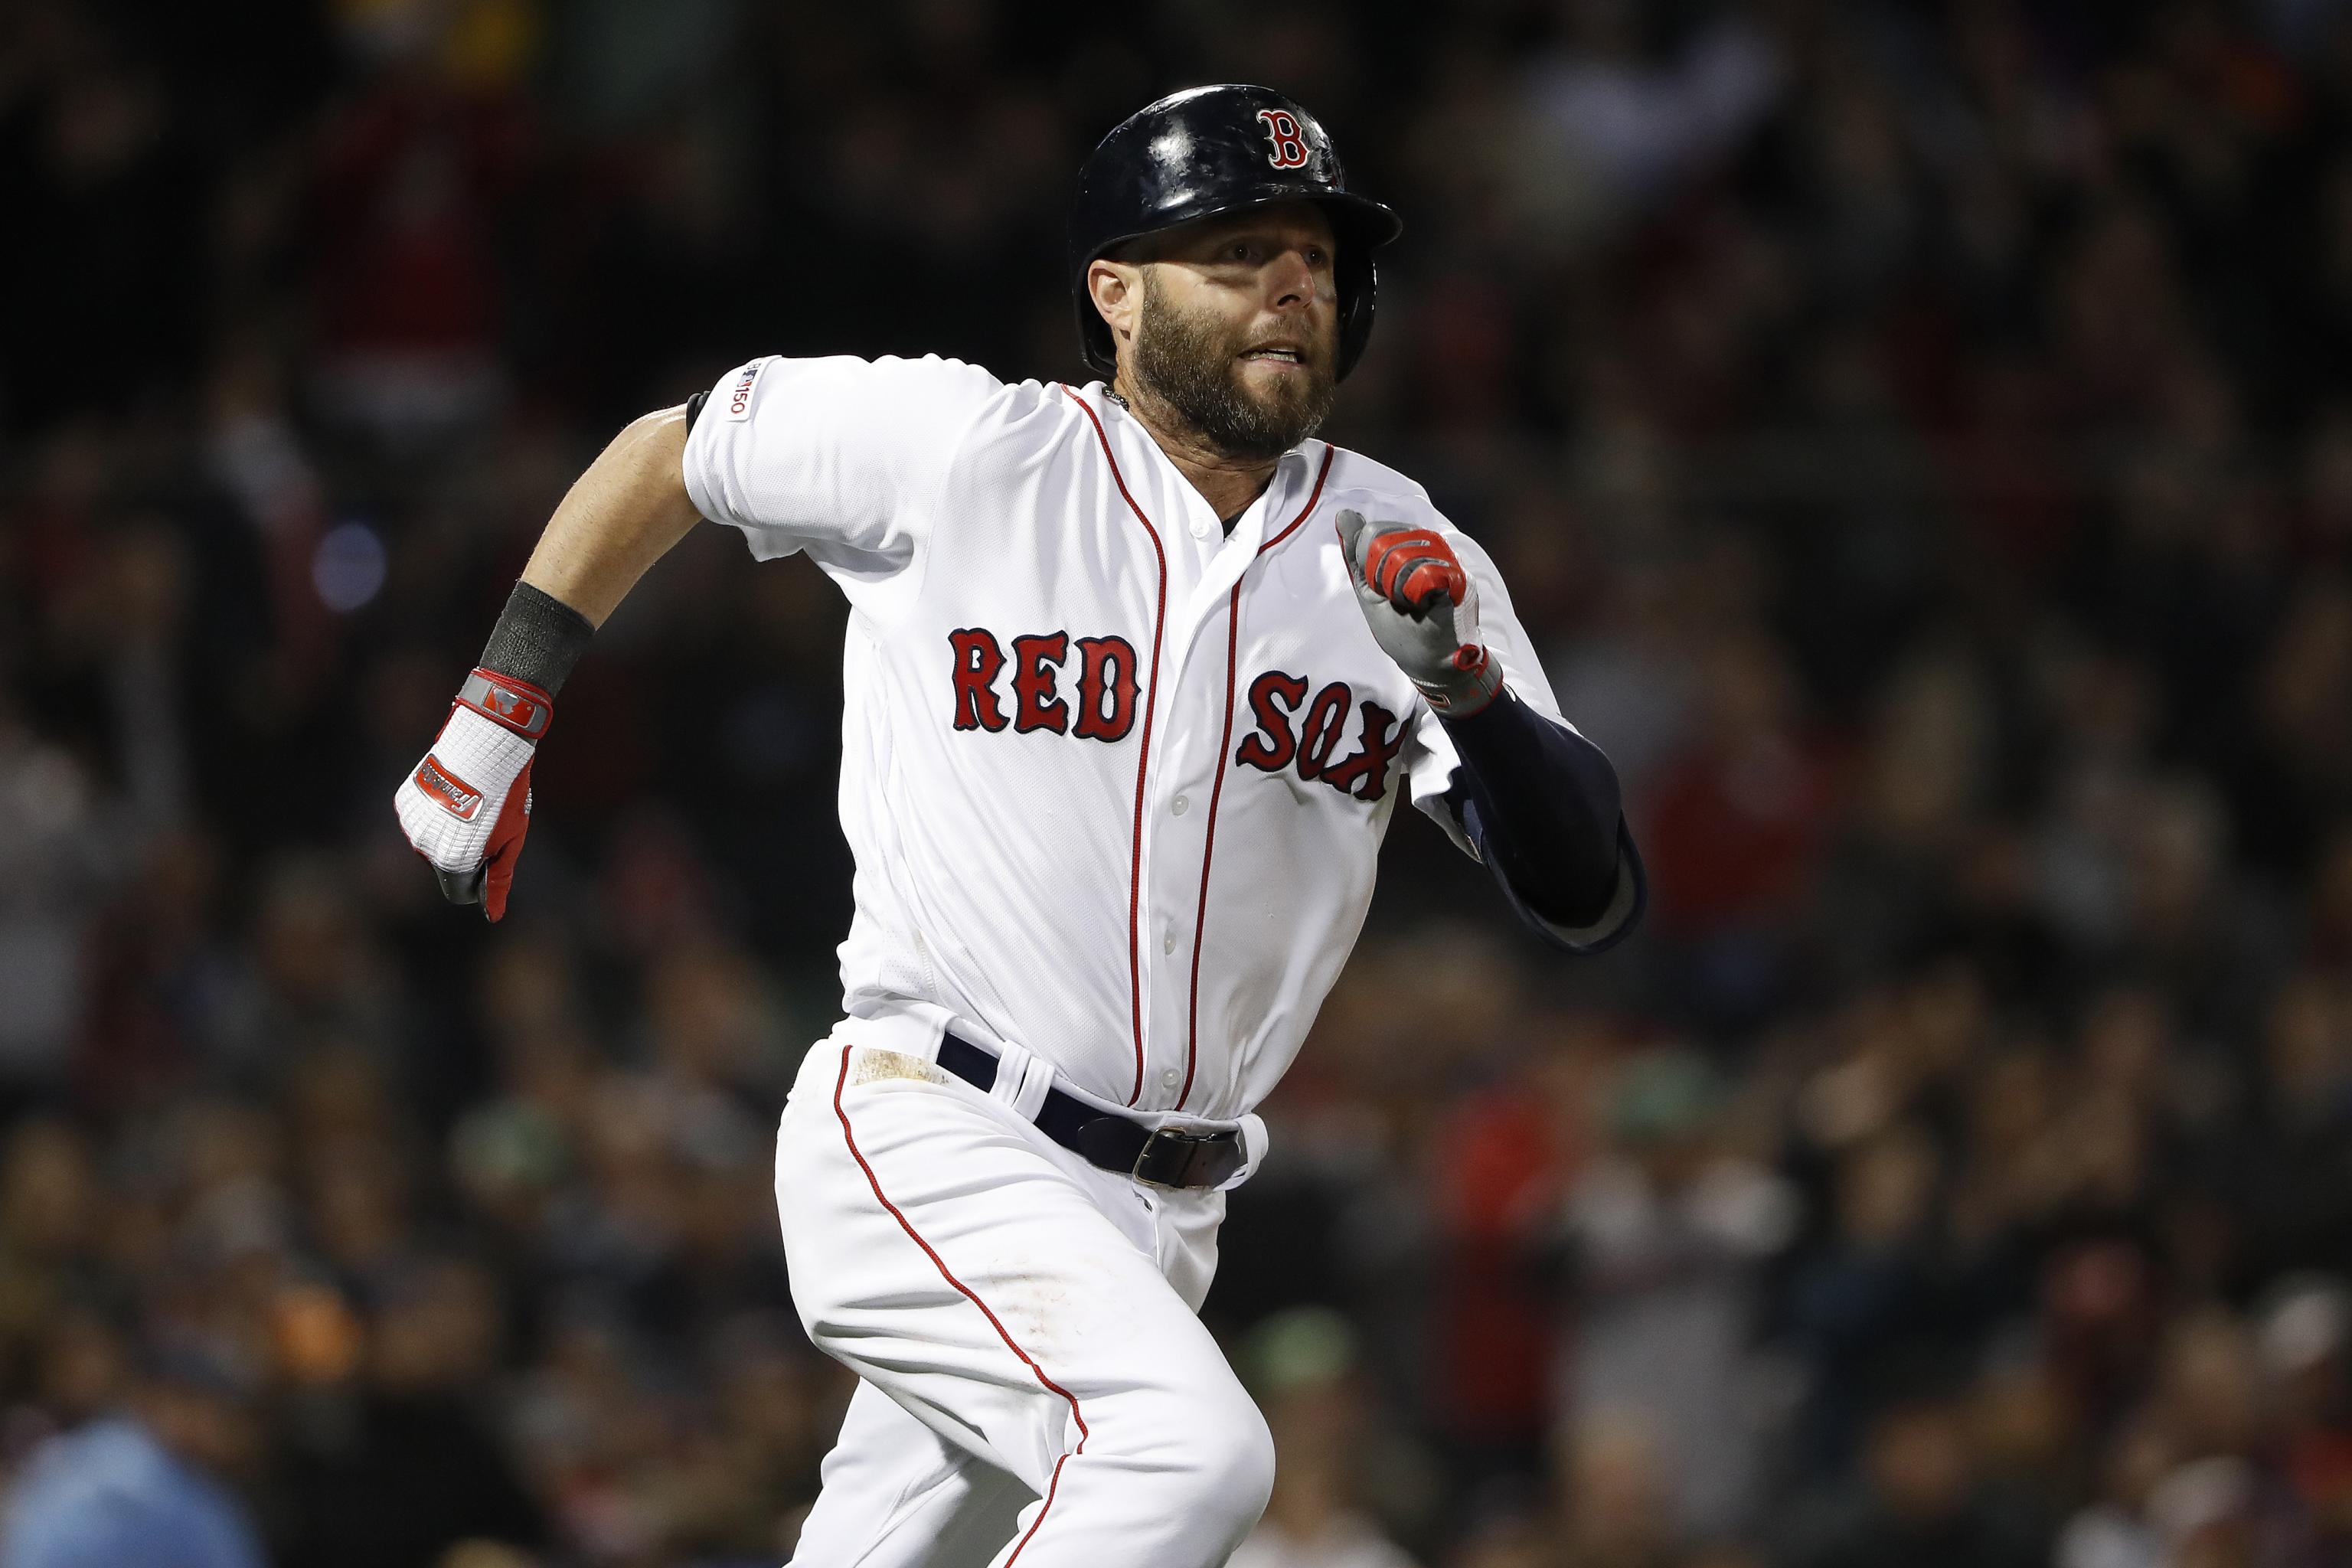 Dustin Pedroia underwent a 'joint preservation procedure' on his knee